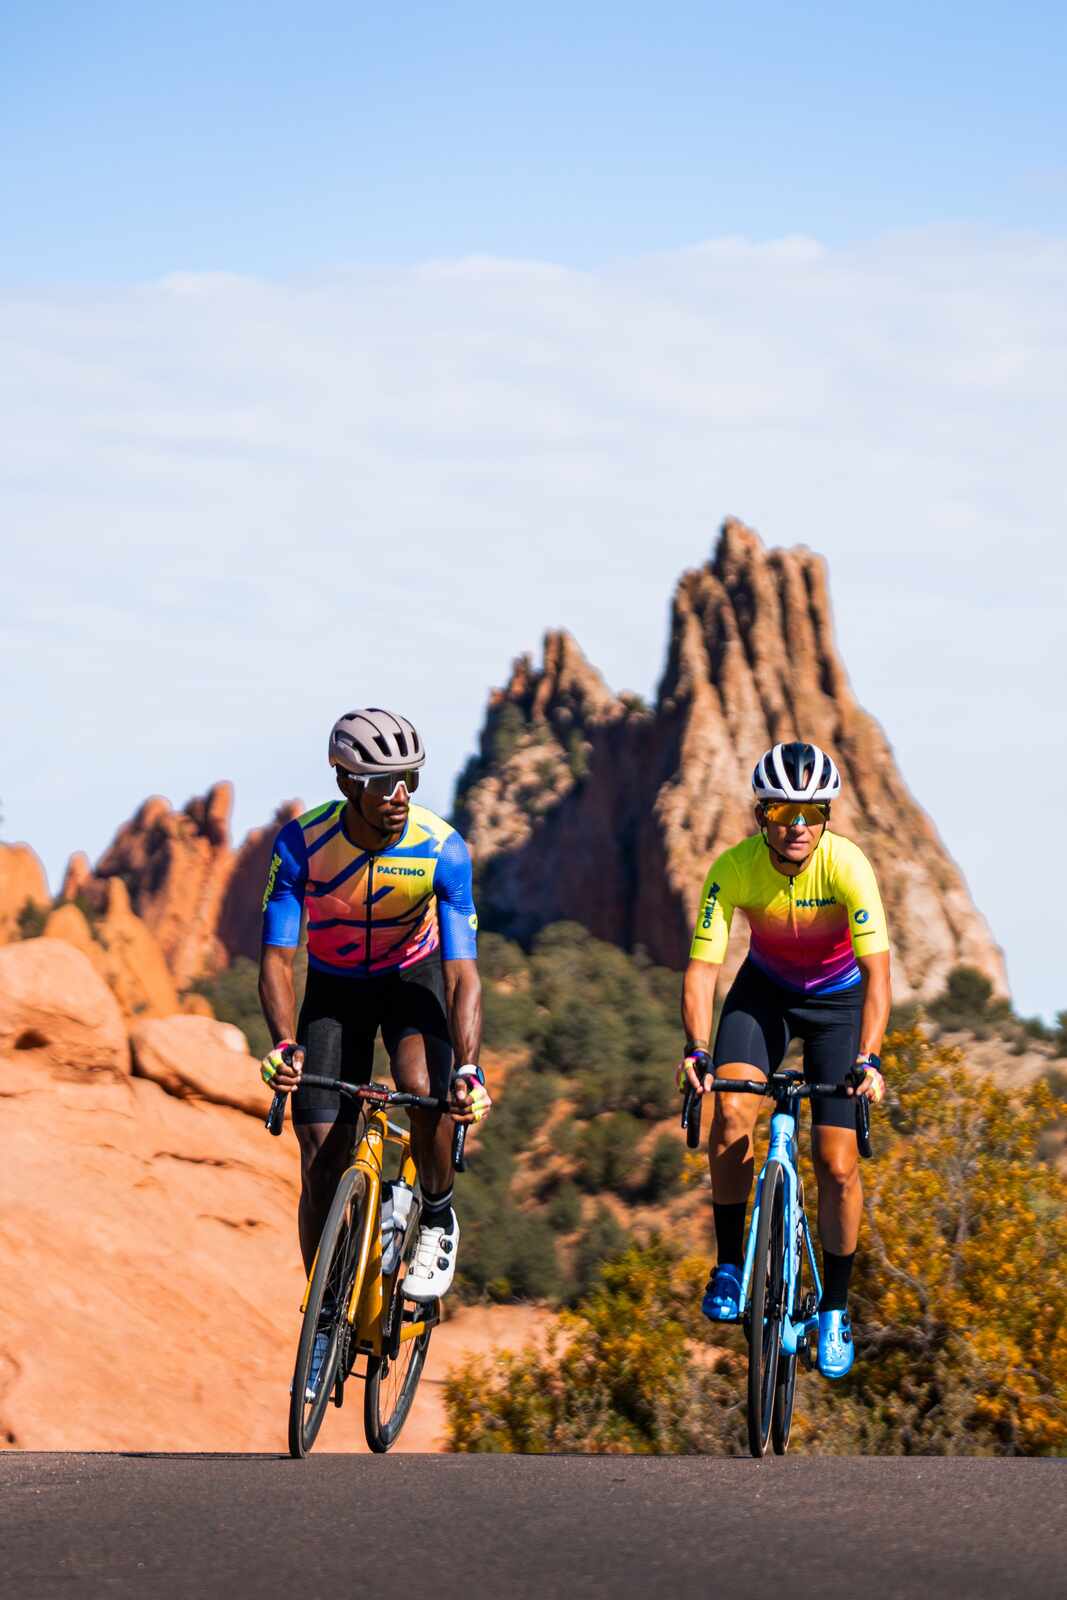 Cyclists in 90s Colors Riding in Garden of the Gods